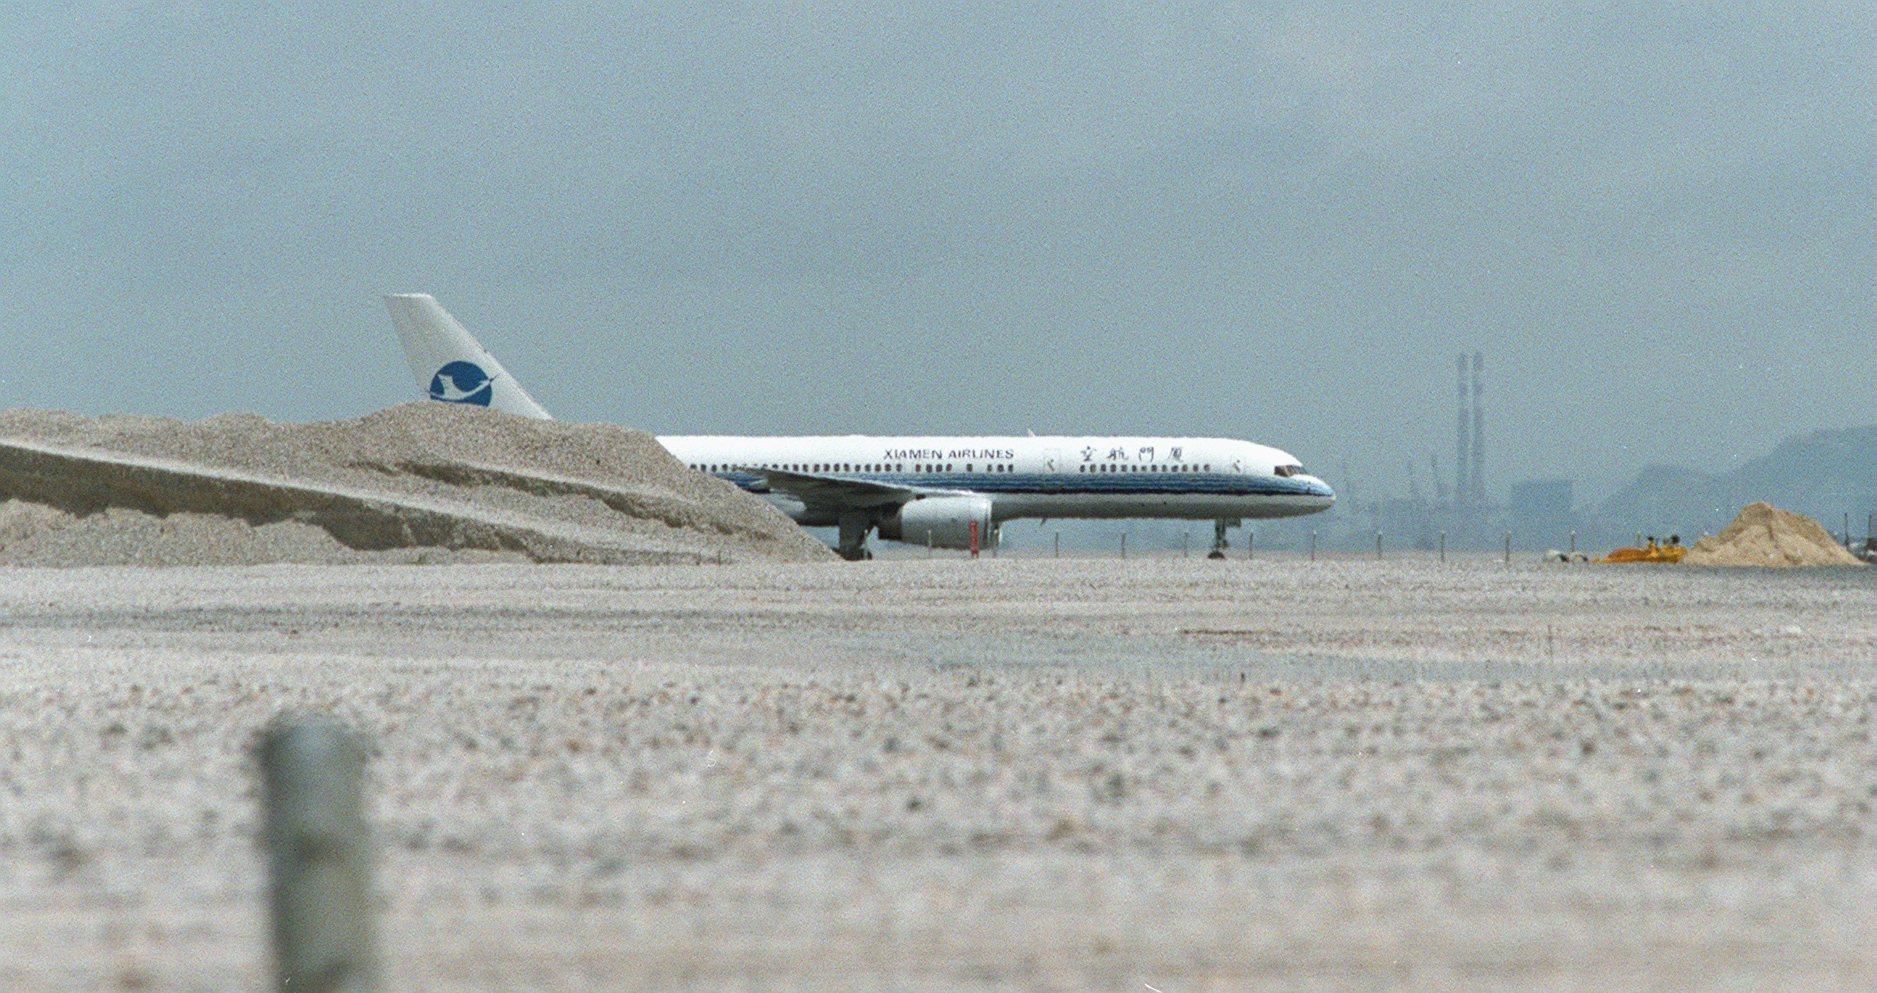 A Xiamen Airlines flight lands on the new north runway at Chek Lap Kok Airport on its opening day.  The first passenger flight to land on the new northern runway was Dragonair flight KA807 arriving from Shanghai at 10:30am.    26 may 99